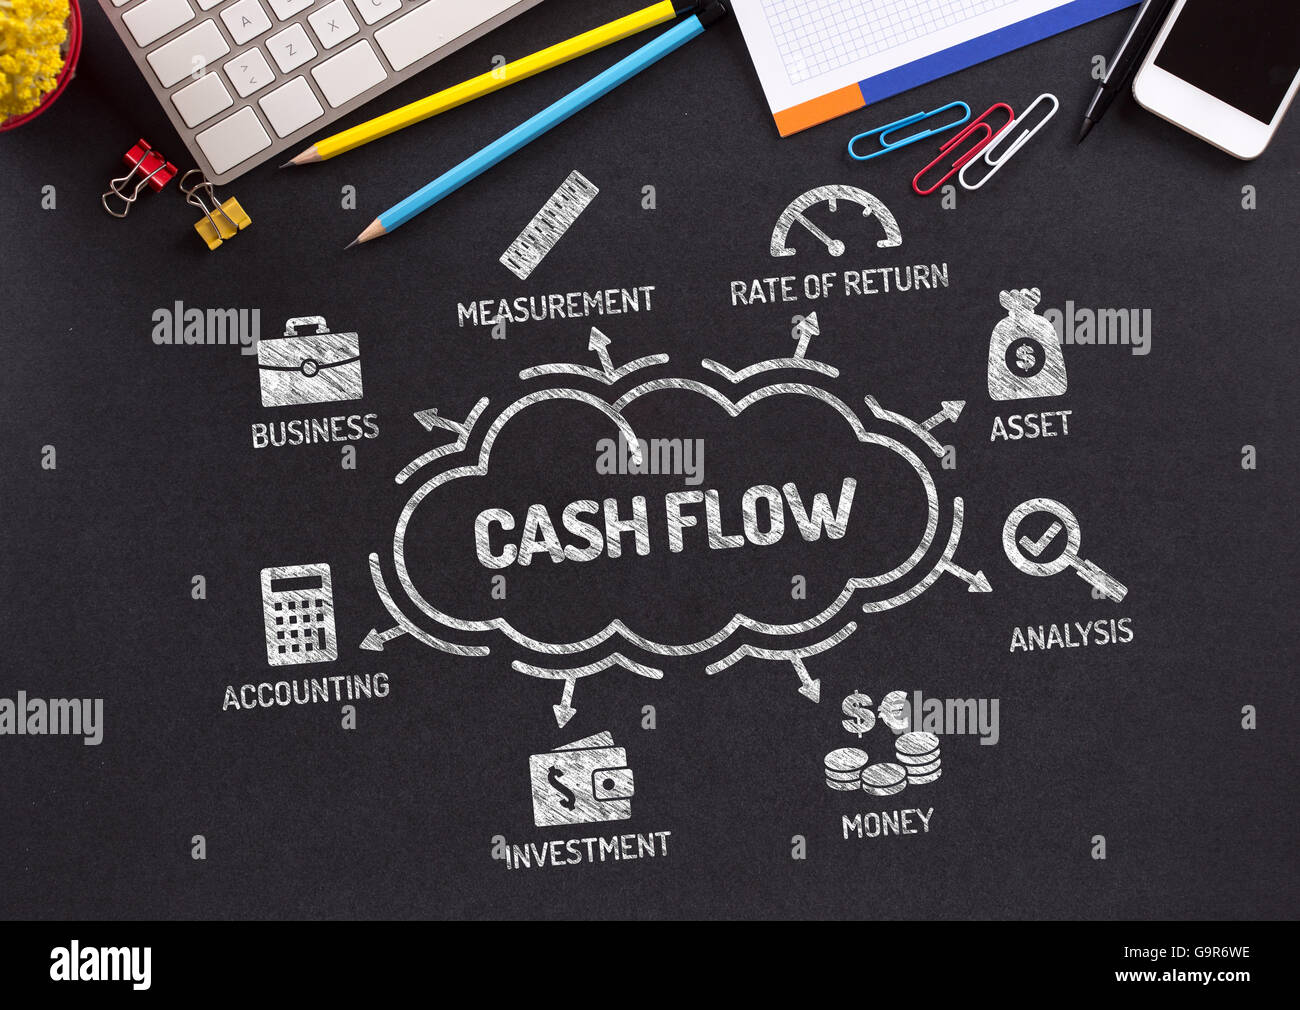 Cash Flow Chart with keywords and icons on blackboard Stock Photo